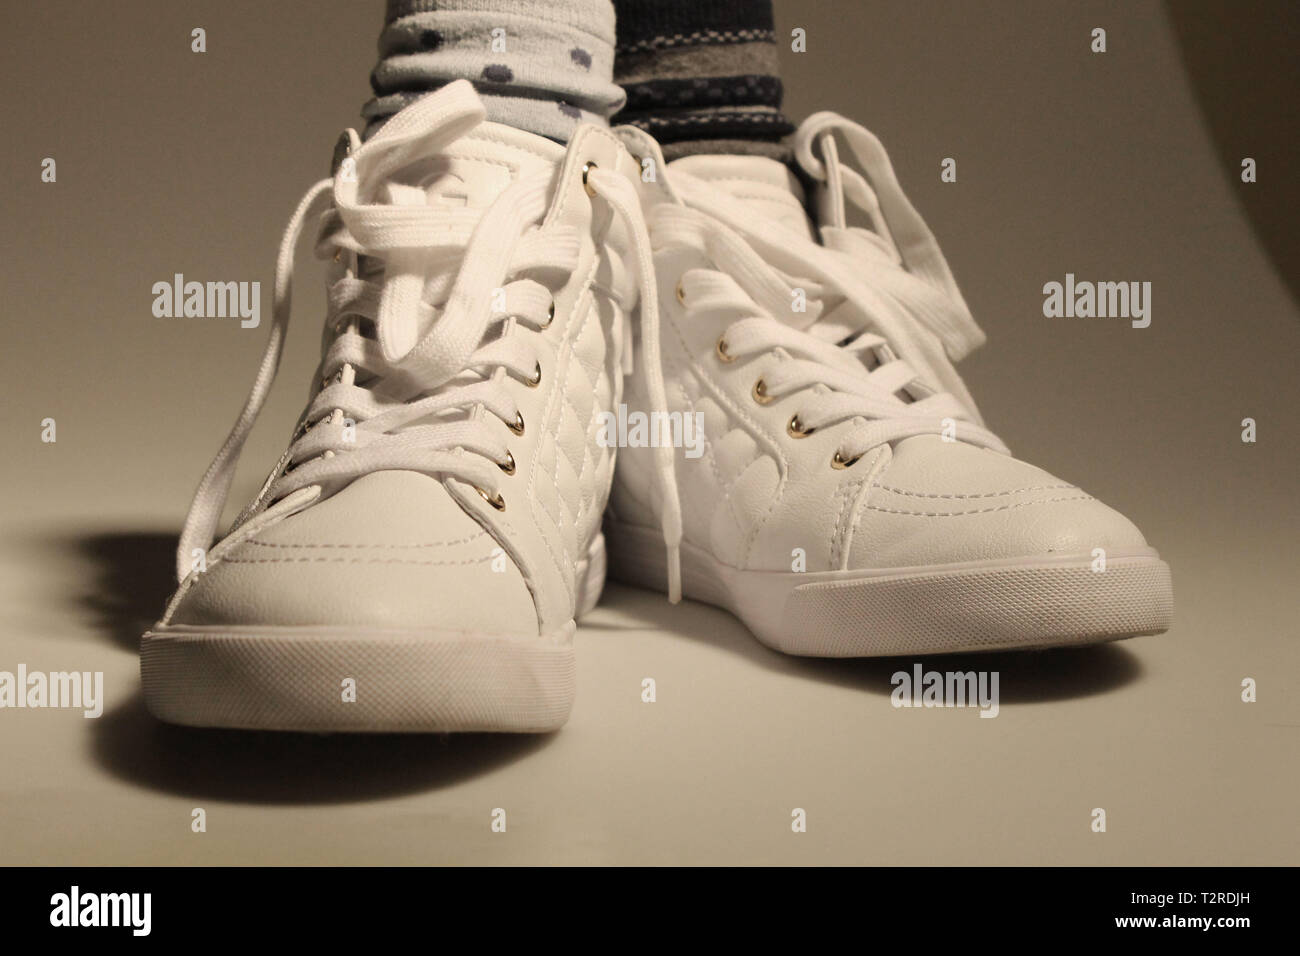 White shoes on white backdrop with mismatched socks and dark shadows. Stock Photo